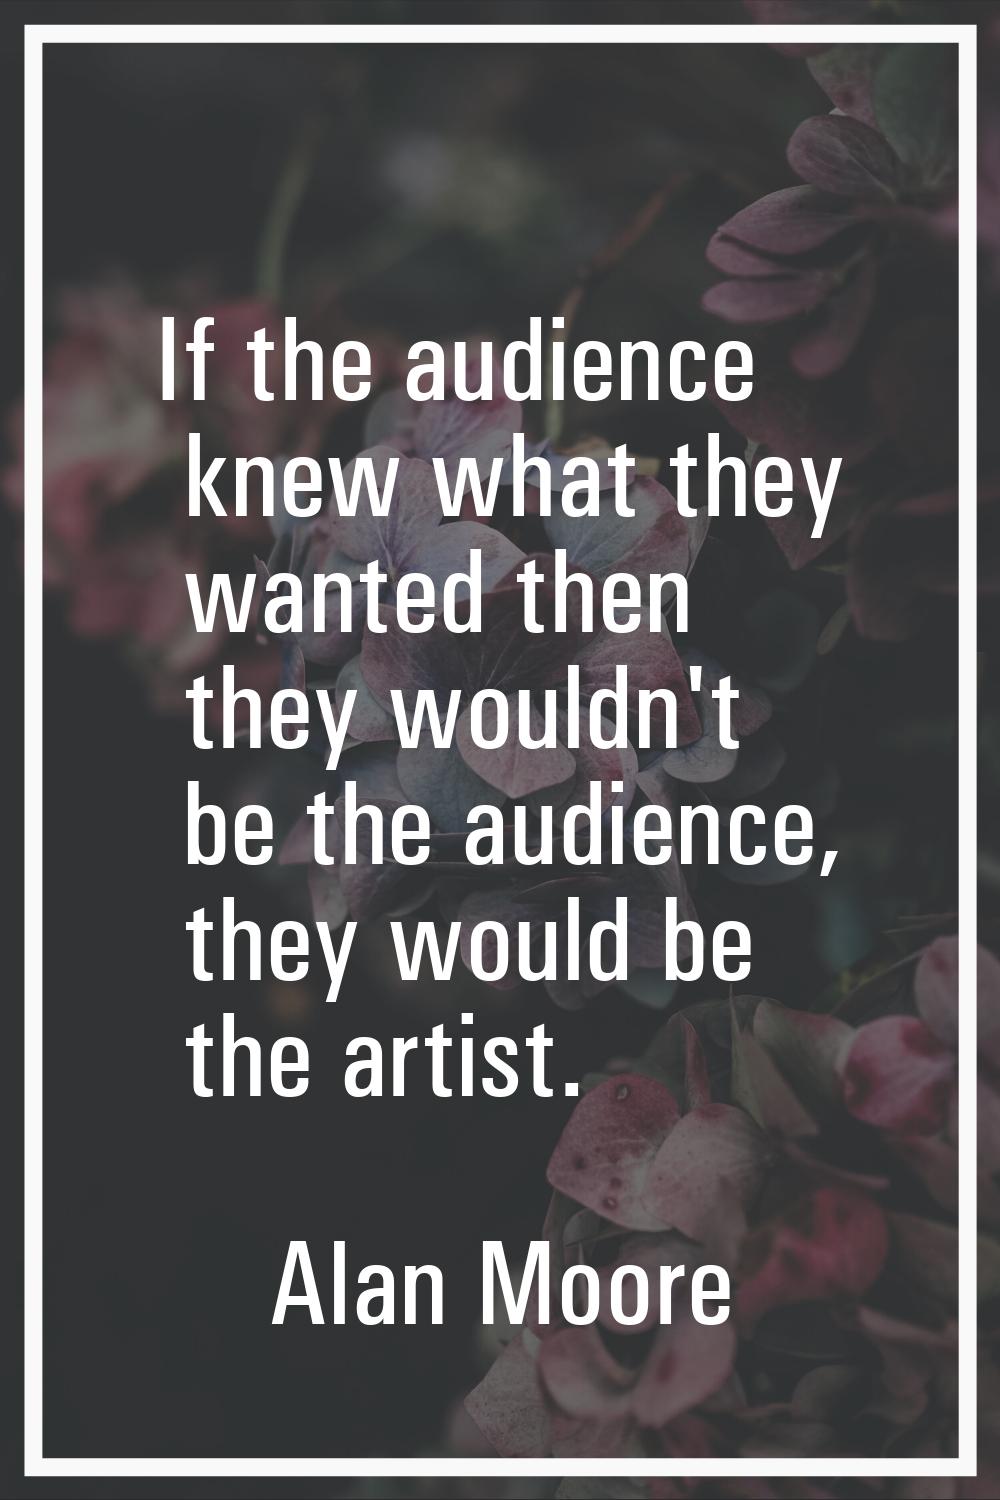 If the audience knew what they wanted then they wouldn't be the audience, they would be the artist.